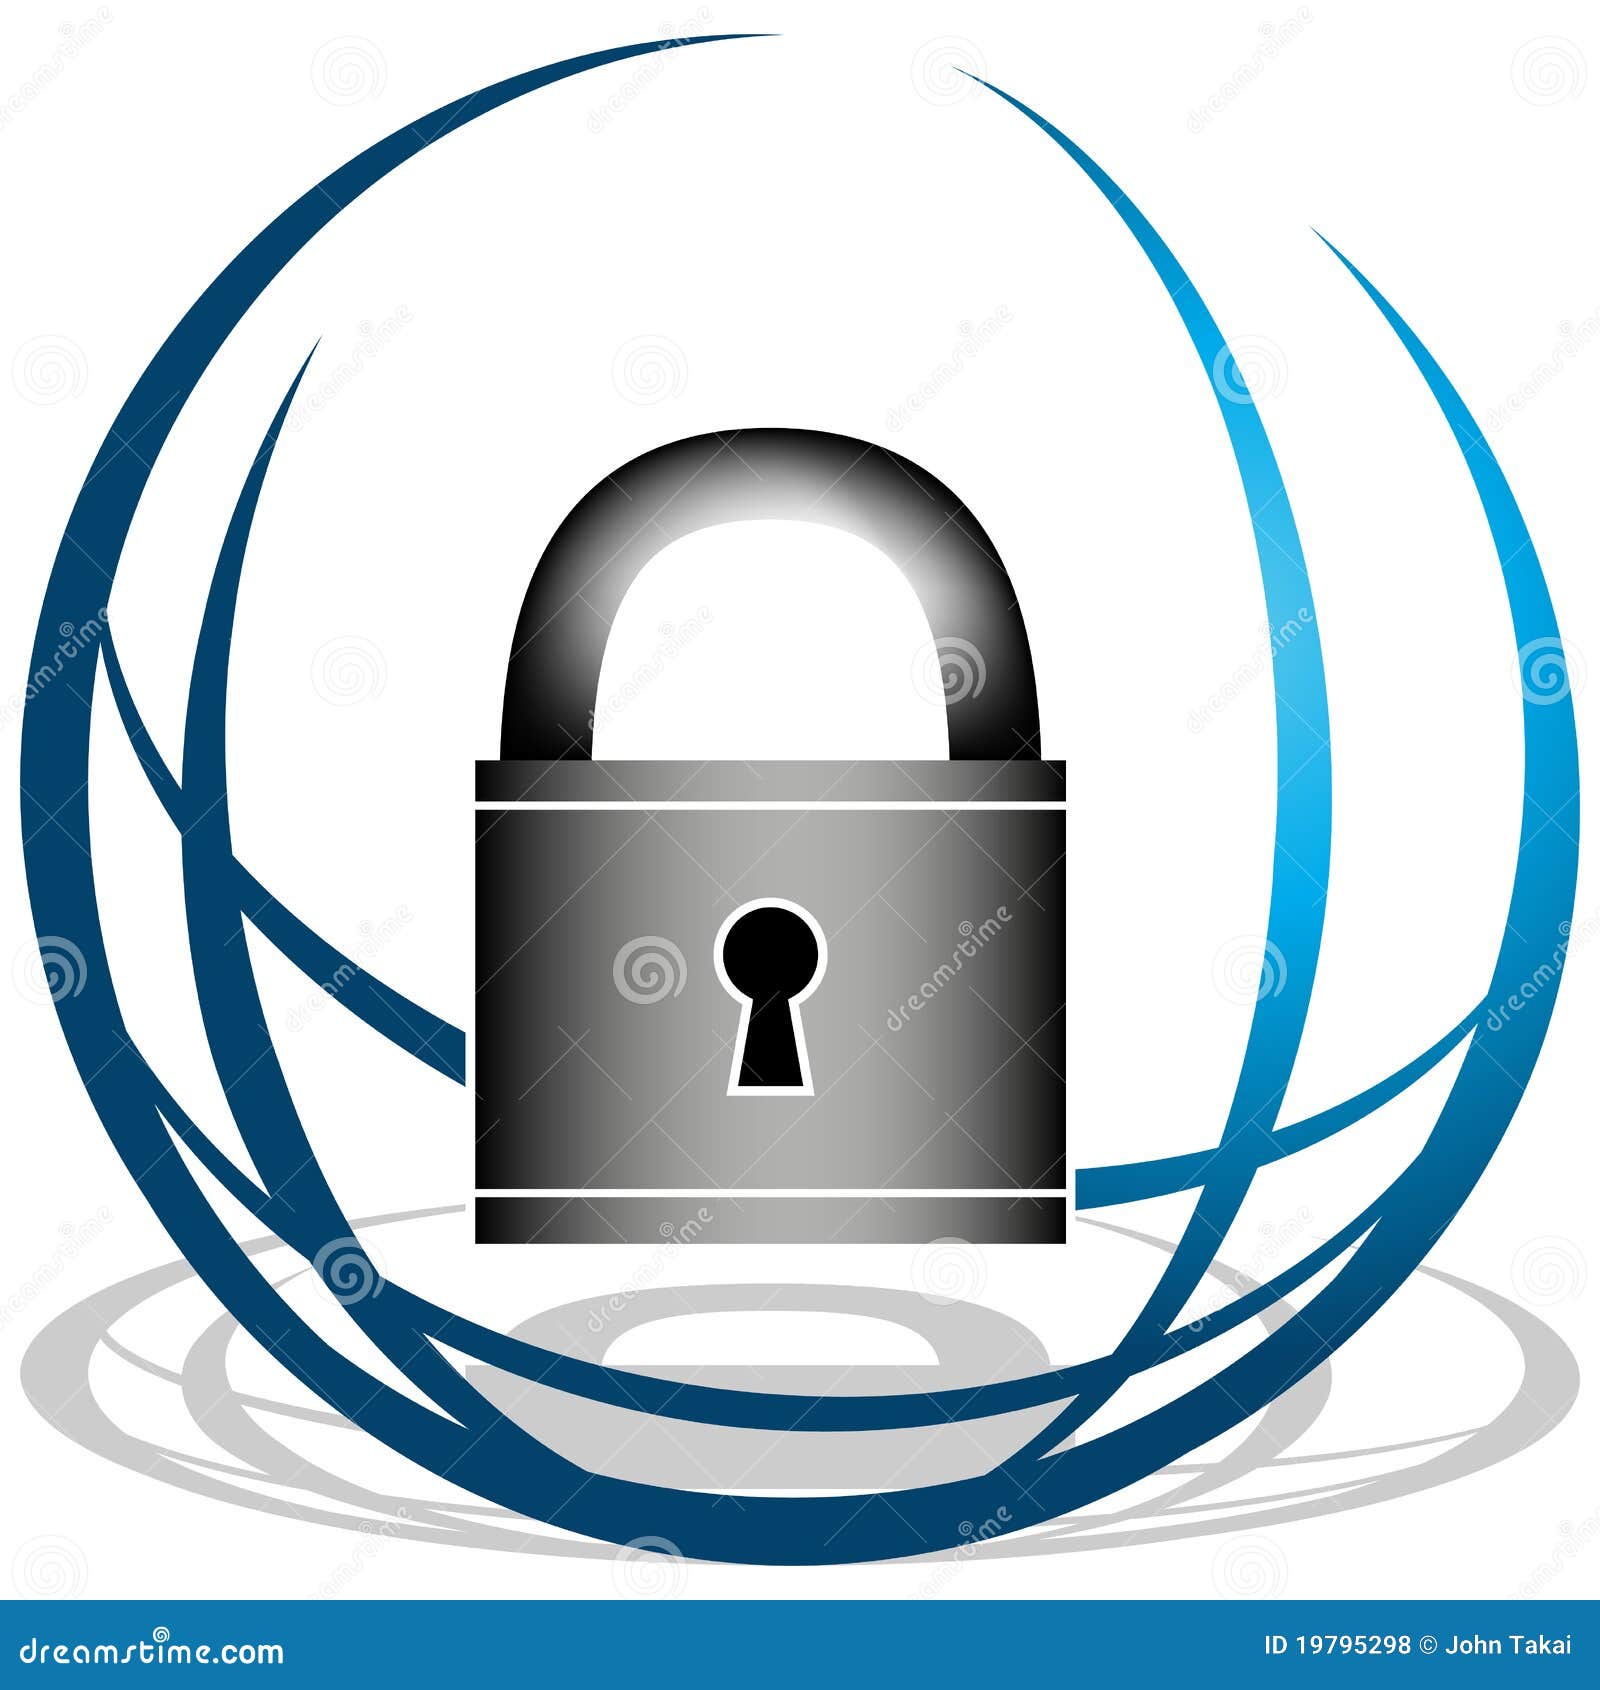 network security clipart - photo #4